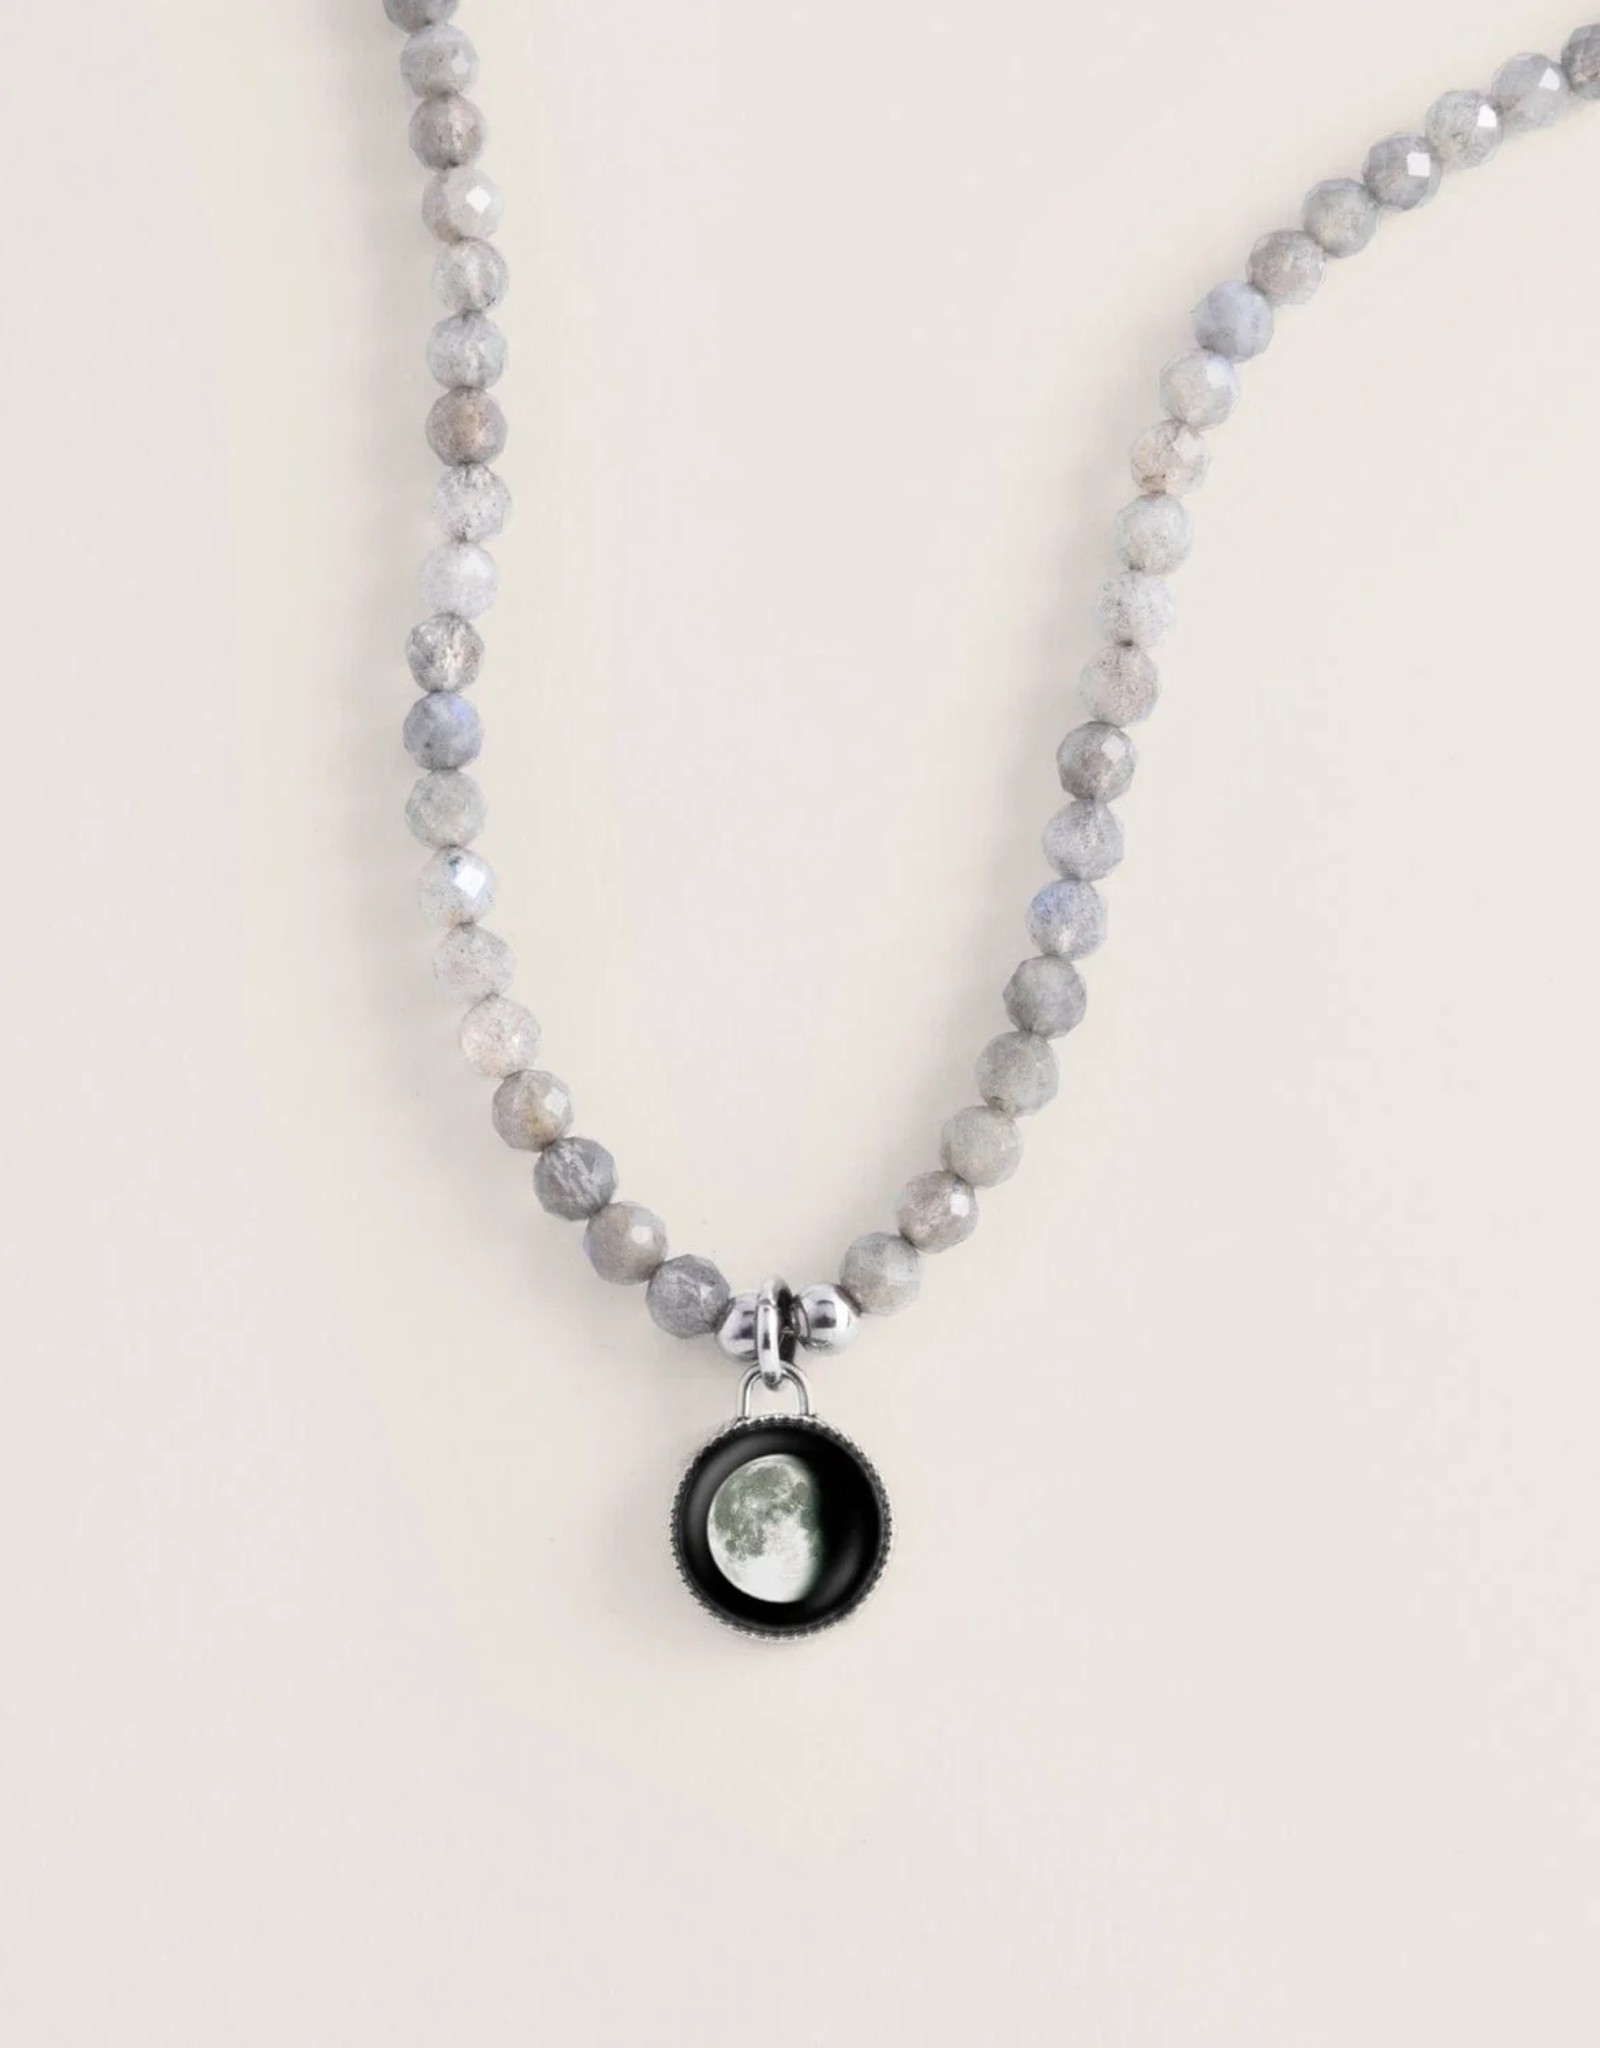 Moonglow Jewelry Moonglow Bhavana Crystal Necklace Gray Agate